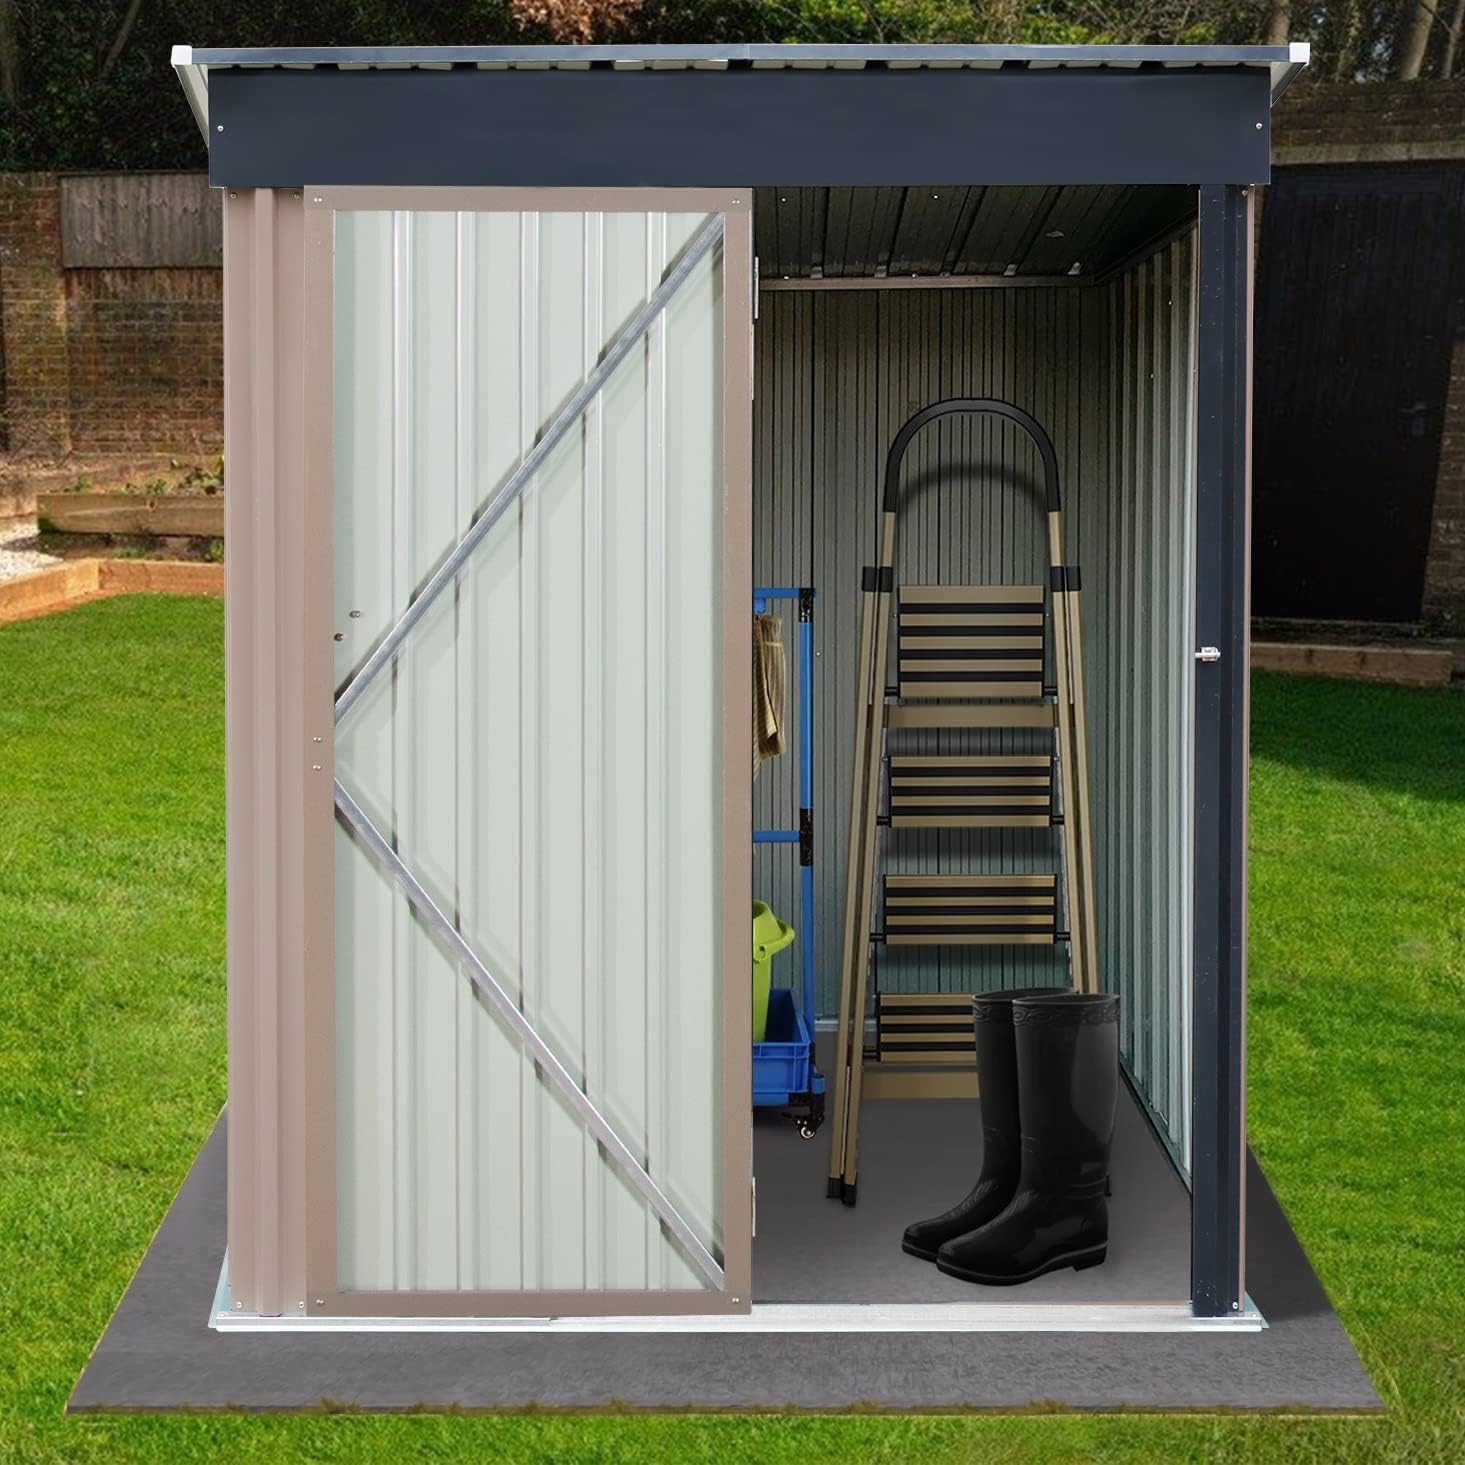 Outdoor metal storage shed, small metal shed with lock door (steel)